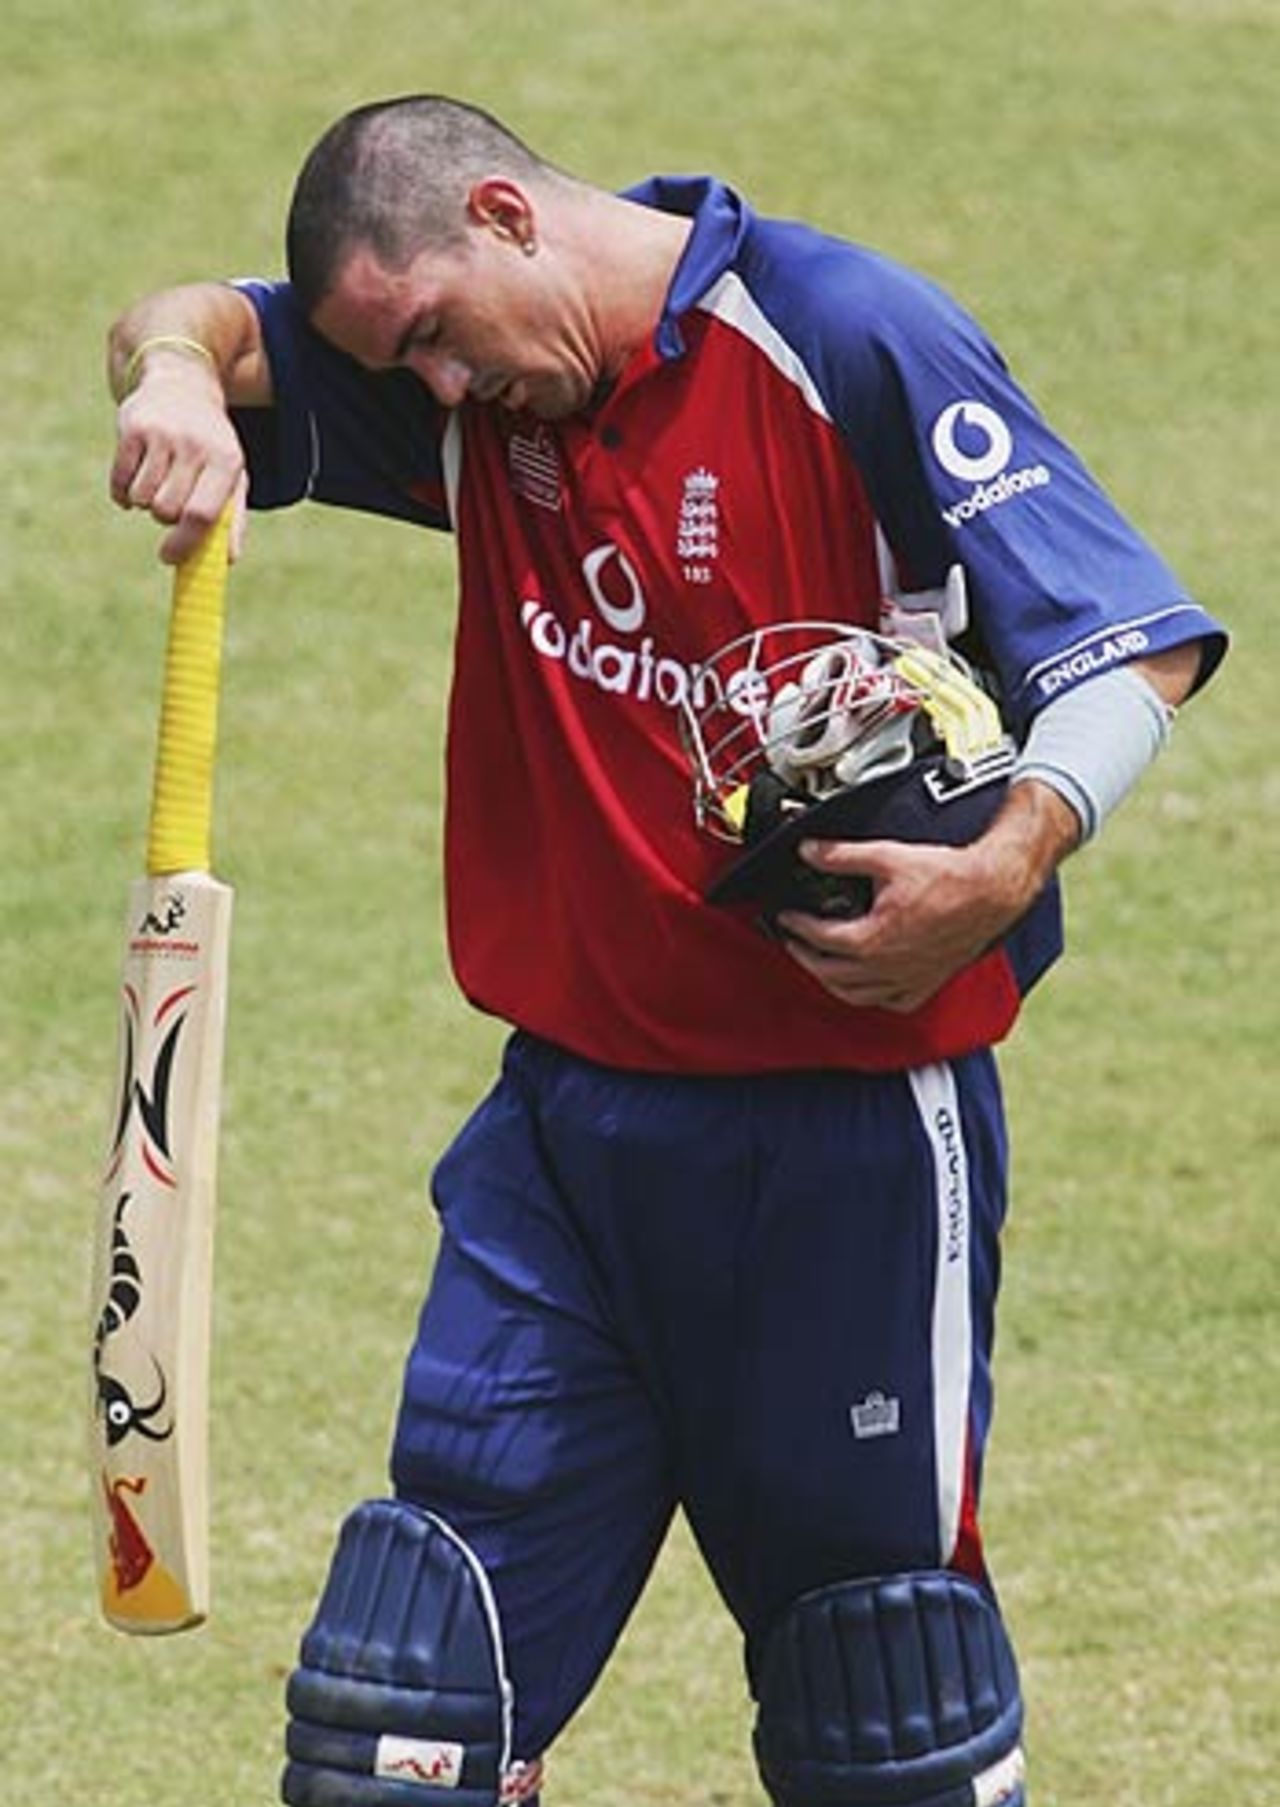 Kevin Pietersen holed out for 77, India v England, 4th ODI, Kochi, April 6, 2006